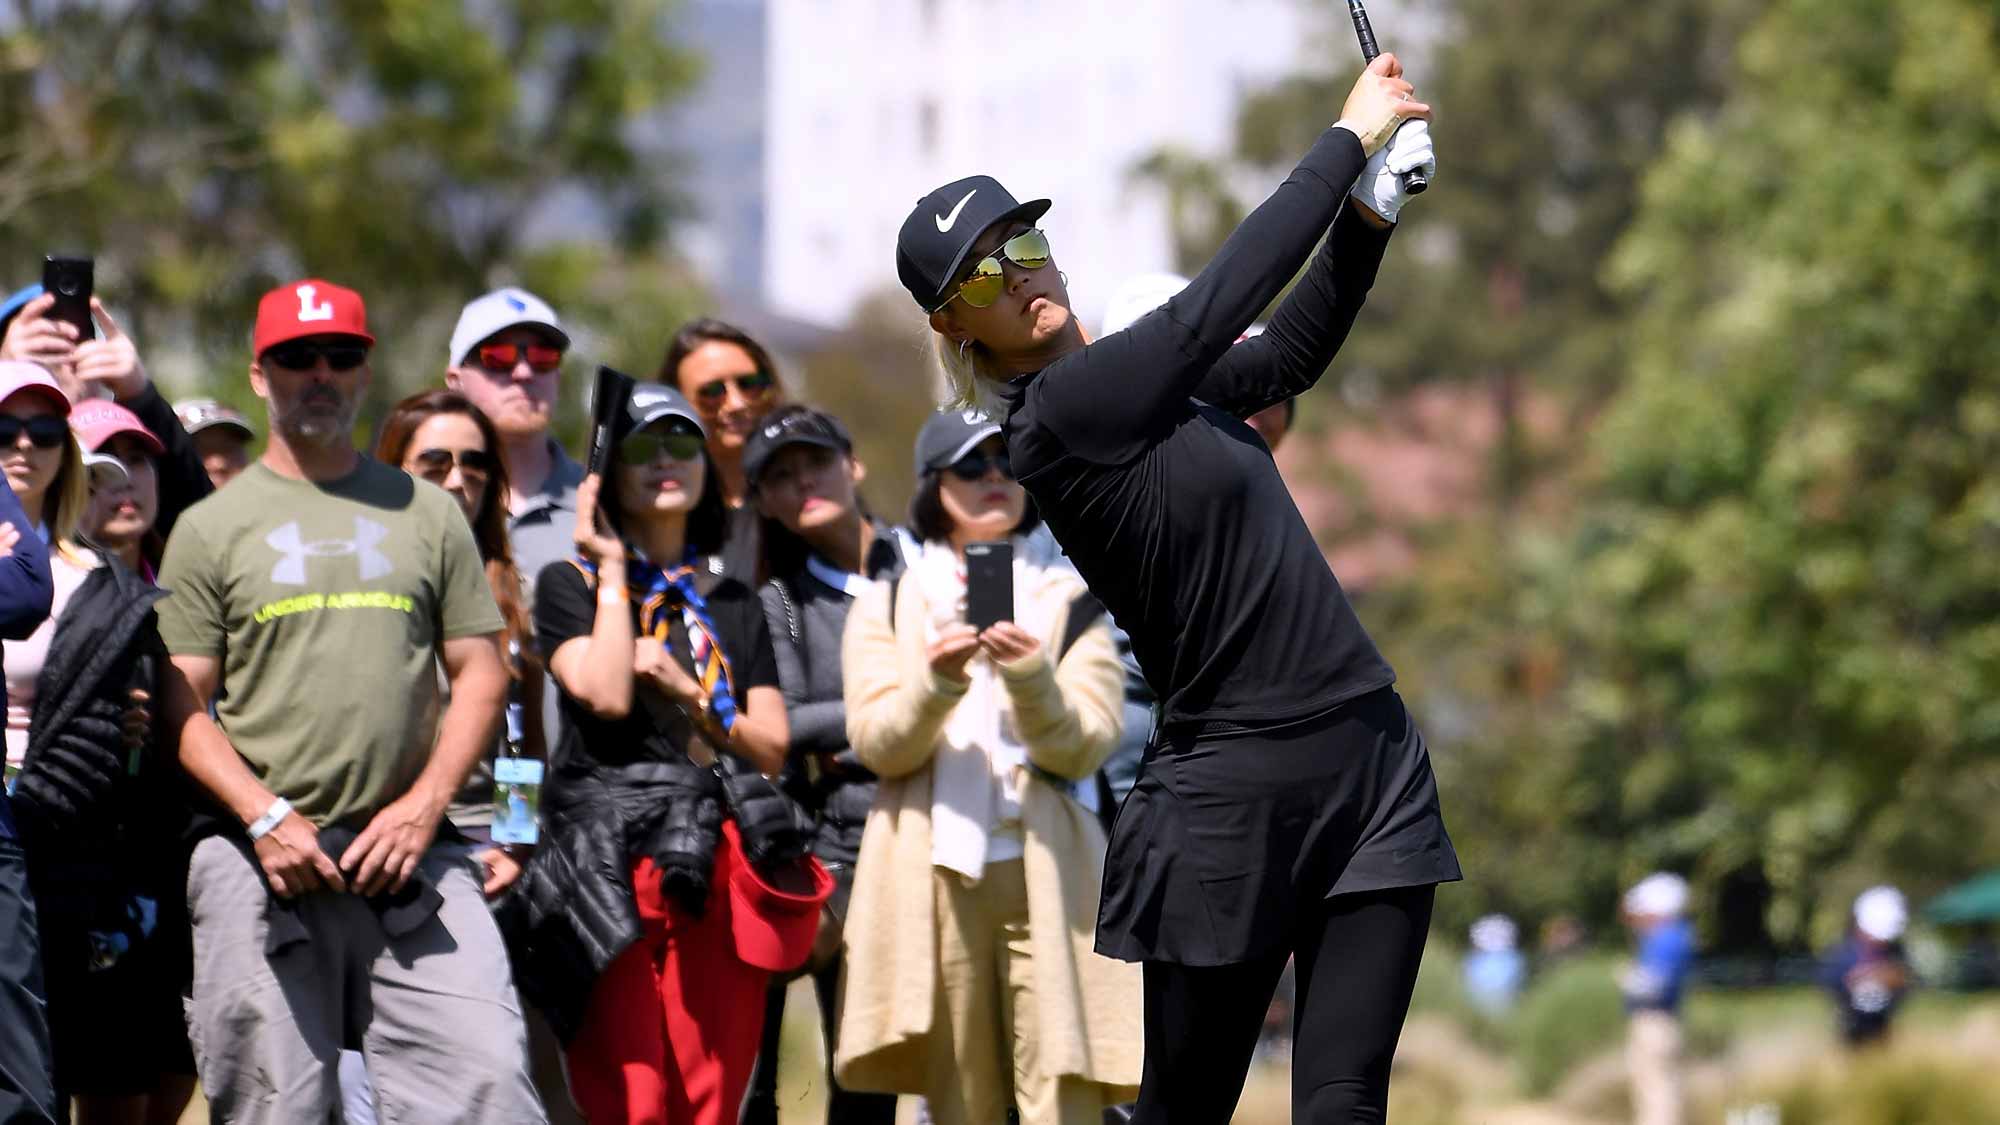 Michelle Wie hits a second shot out of the rough on the sixth fairway during round one of the Hugel-JTBC LA Open at the Wilshire Country Club on April 19, 2018 in Los Angeles, California